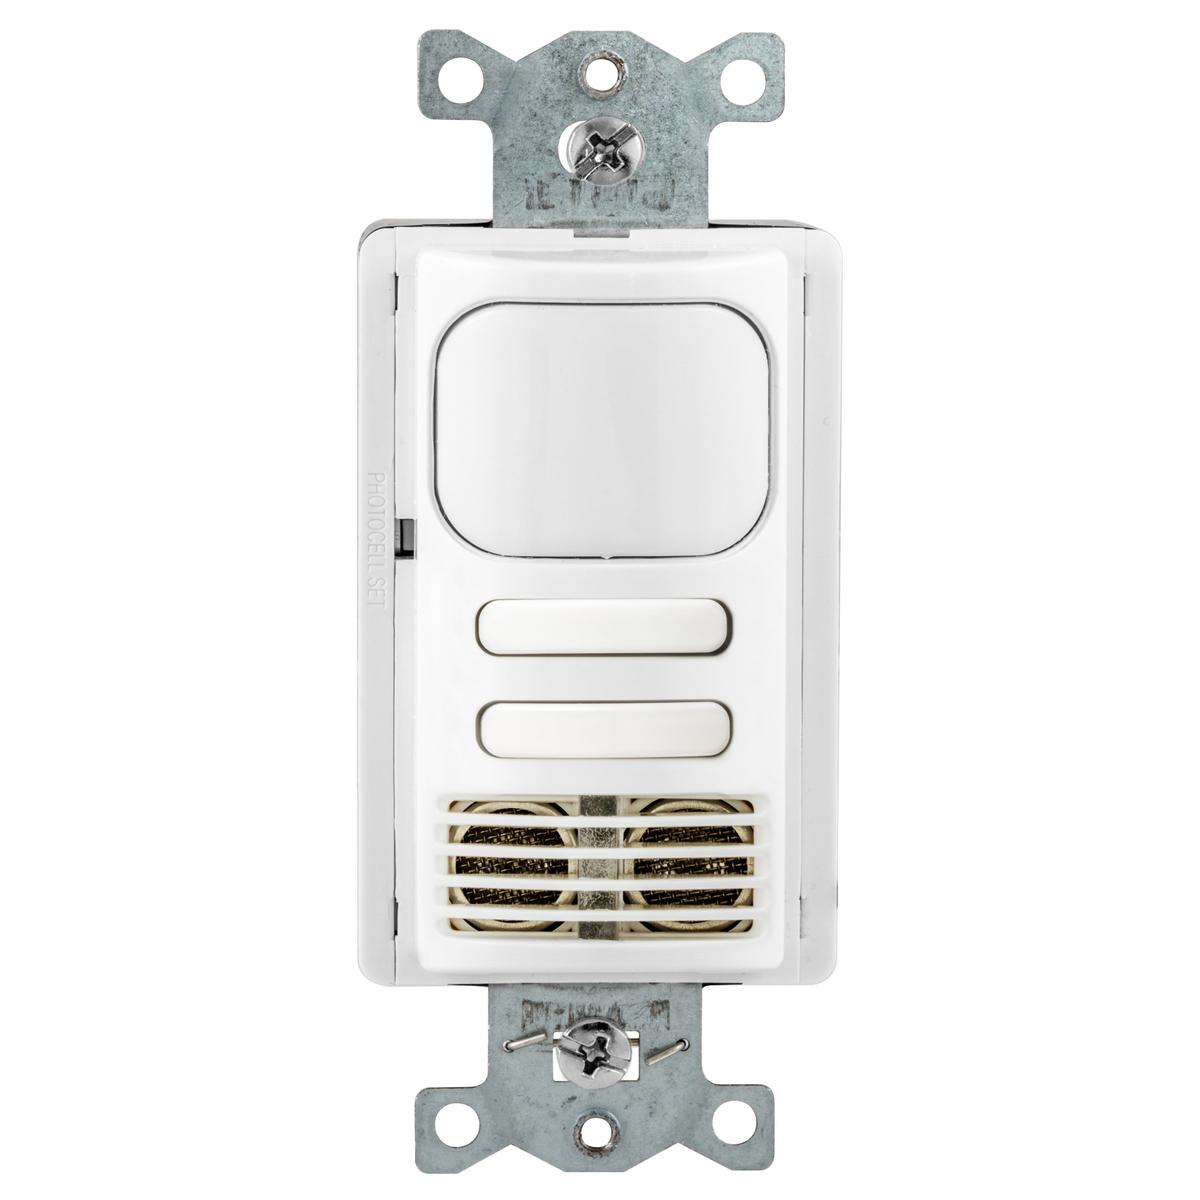 Hubbell AD2240W2 Occupancy/Vacancy Sensors, Wall Switch,Adaptive Dual Technology, 2 Circuit, 24V DC, White 